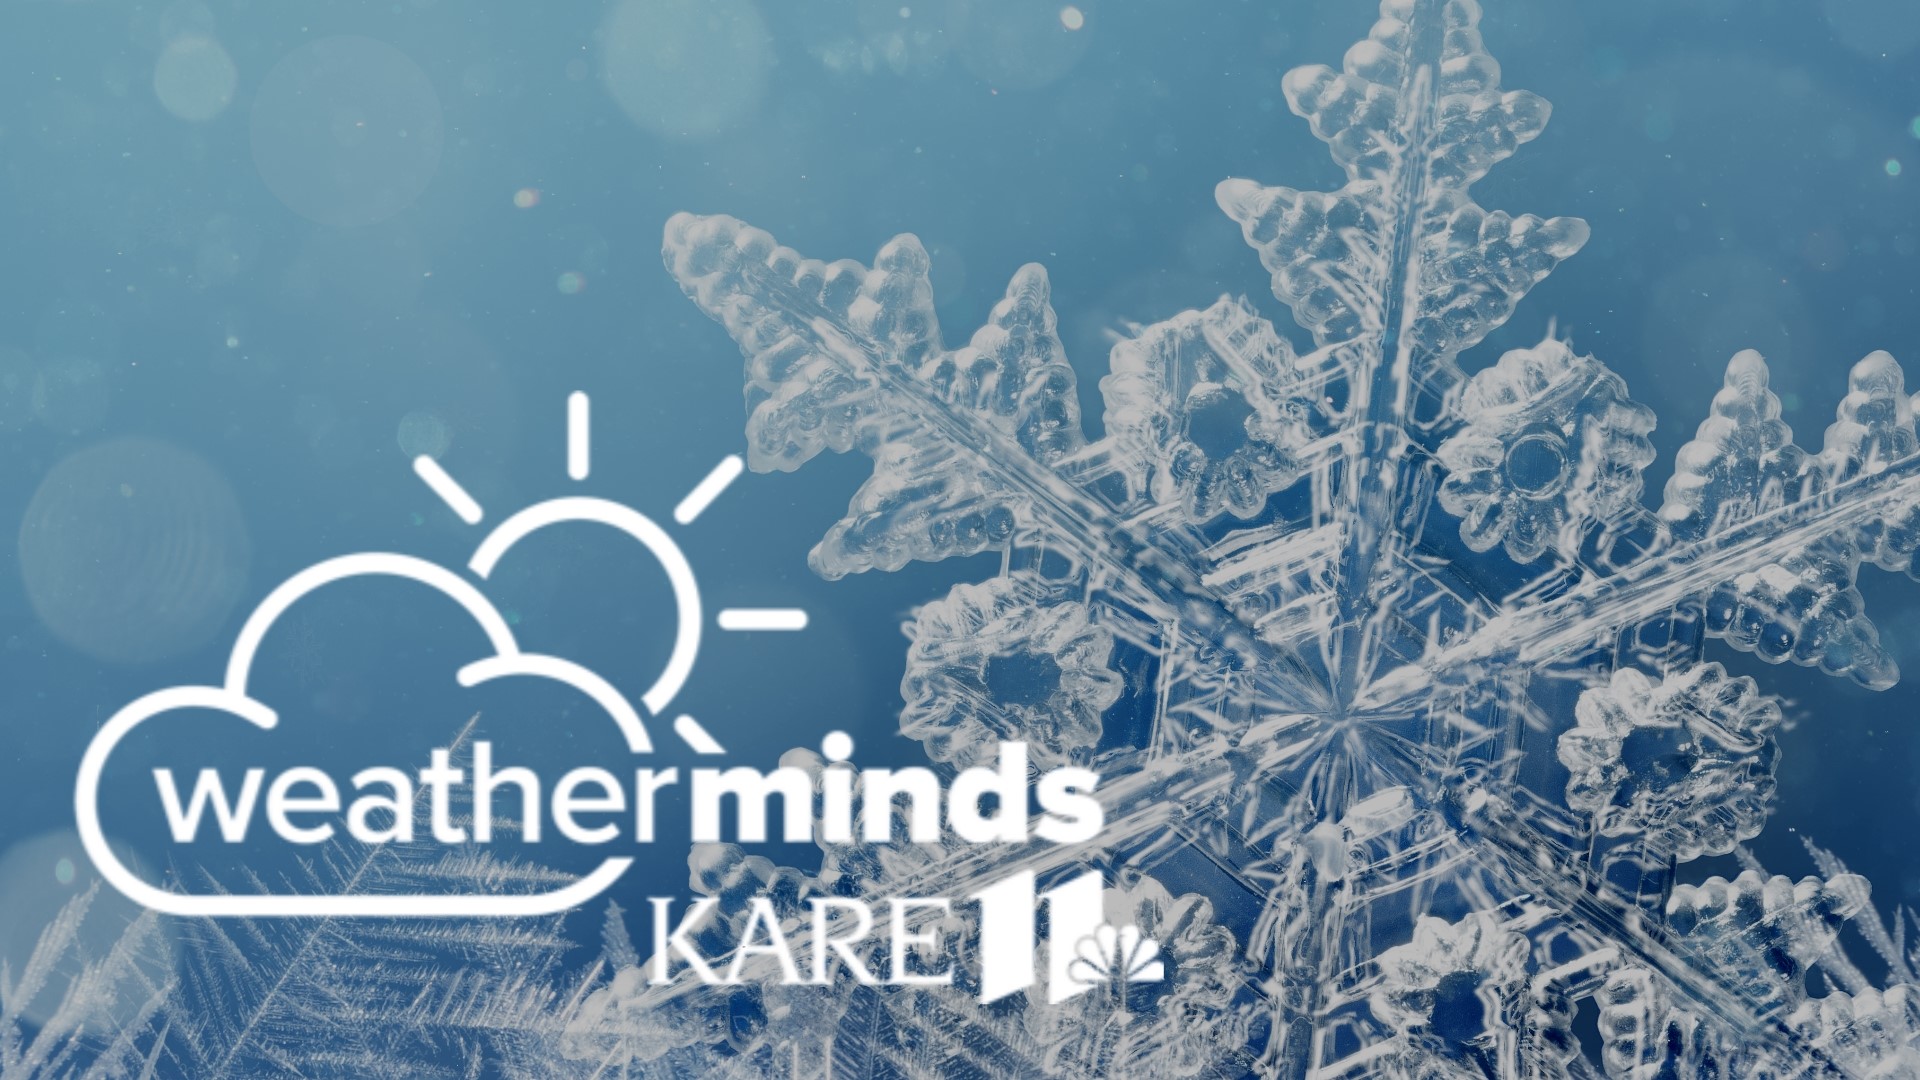 Minnesota winters can be both fun and dangerous with snow and sometimes ice in the forecast. The KARE 11 weather team explains the snowy science.